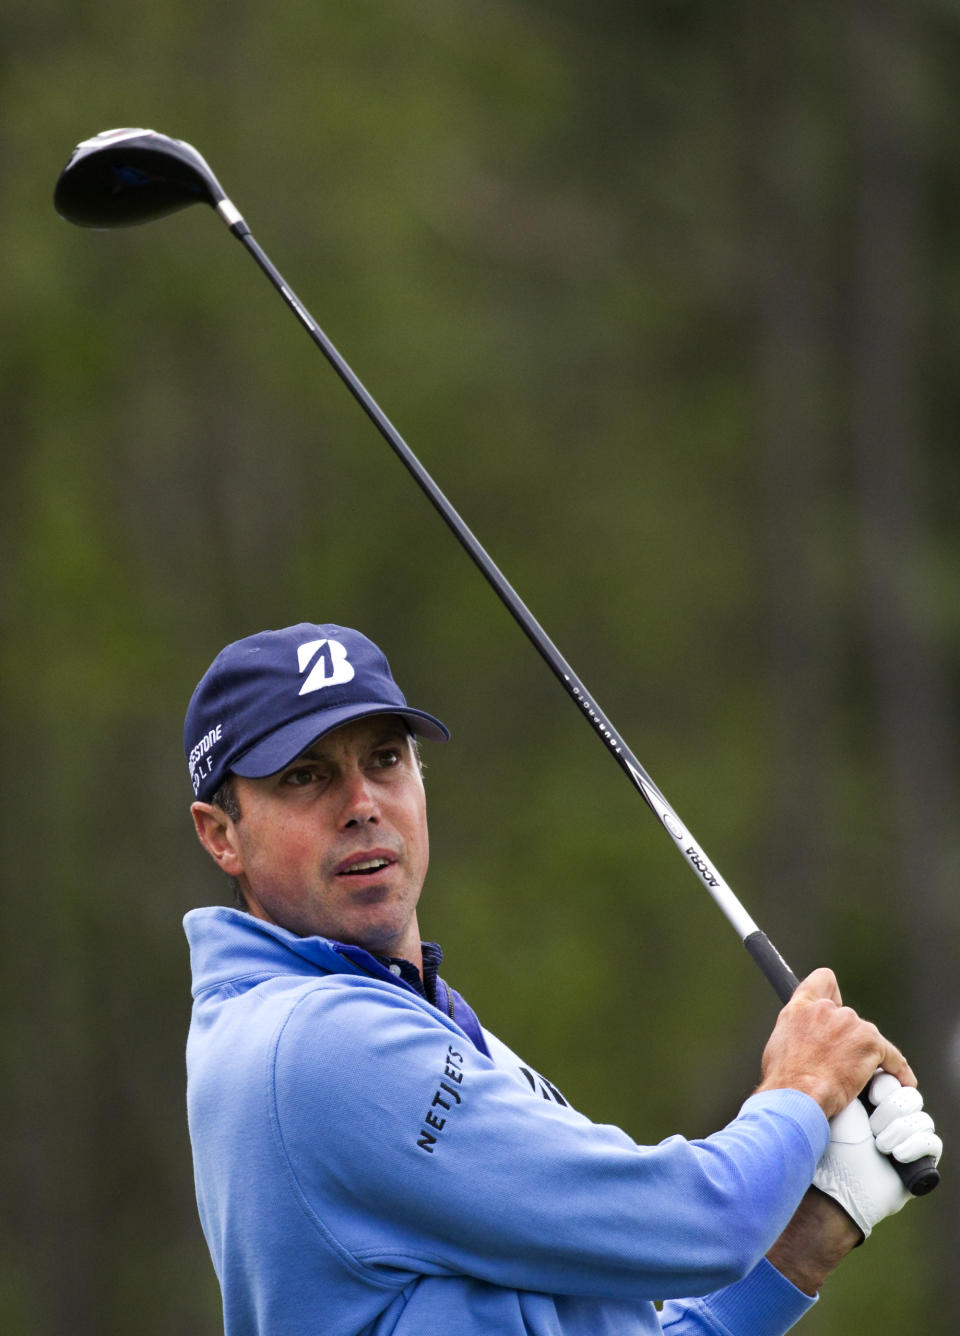 Matt Kuchar hits off the tee on the eighth hole during the third round of the Houston Open golf tournament on Saturday, April 5, 2014, in Humble, Texas. (AP Photo/Patric Schneider)